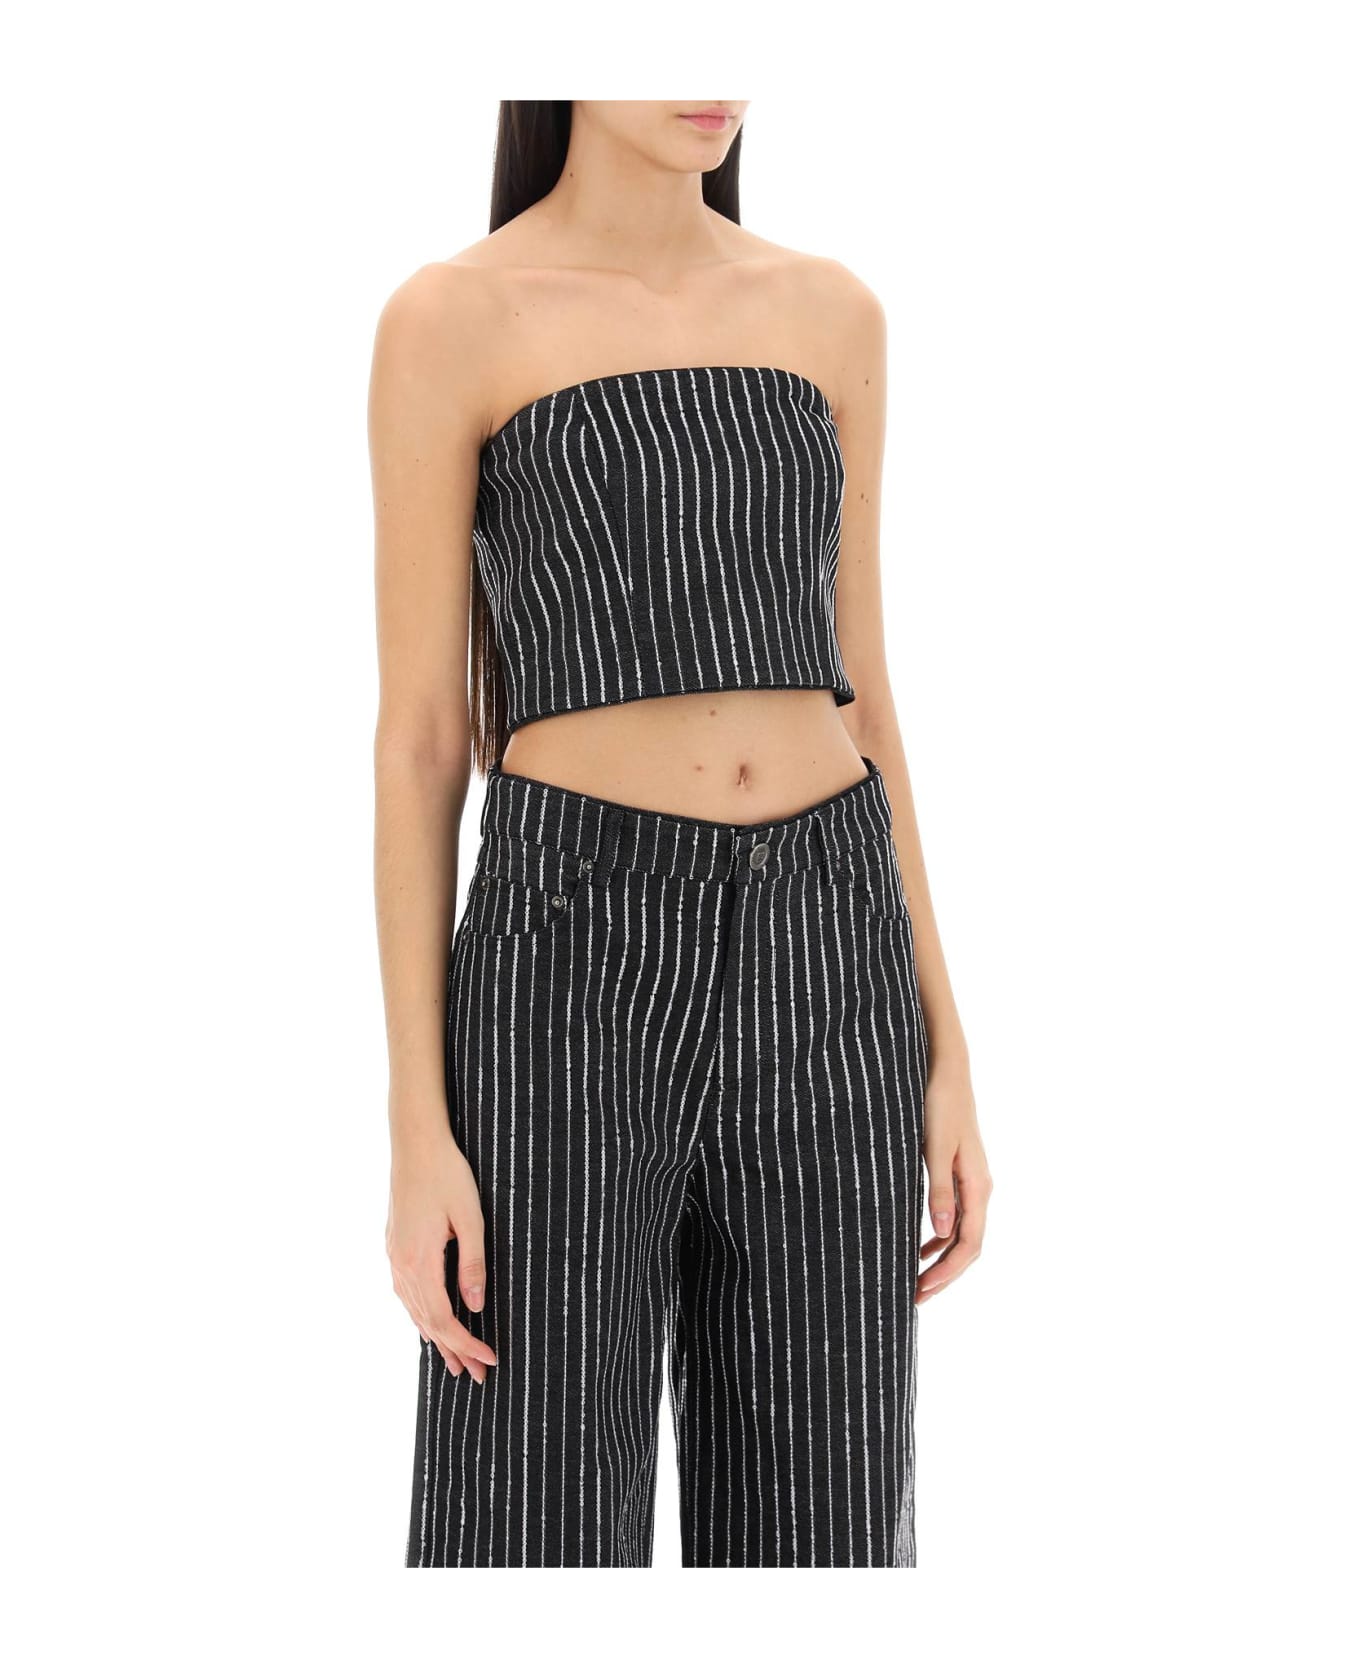 Rotate by Birger Christensen Cropped Top With Sequined Stripes - BLACK (Black)